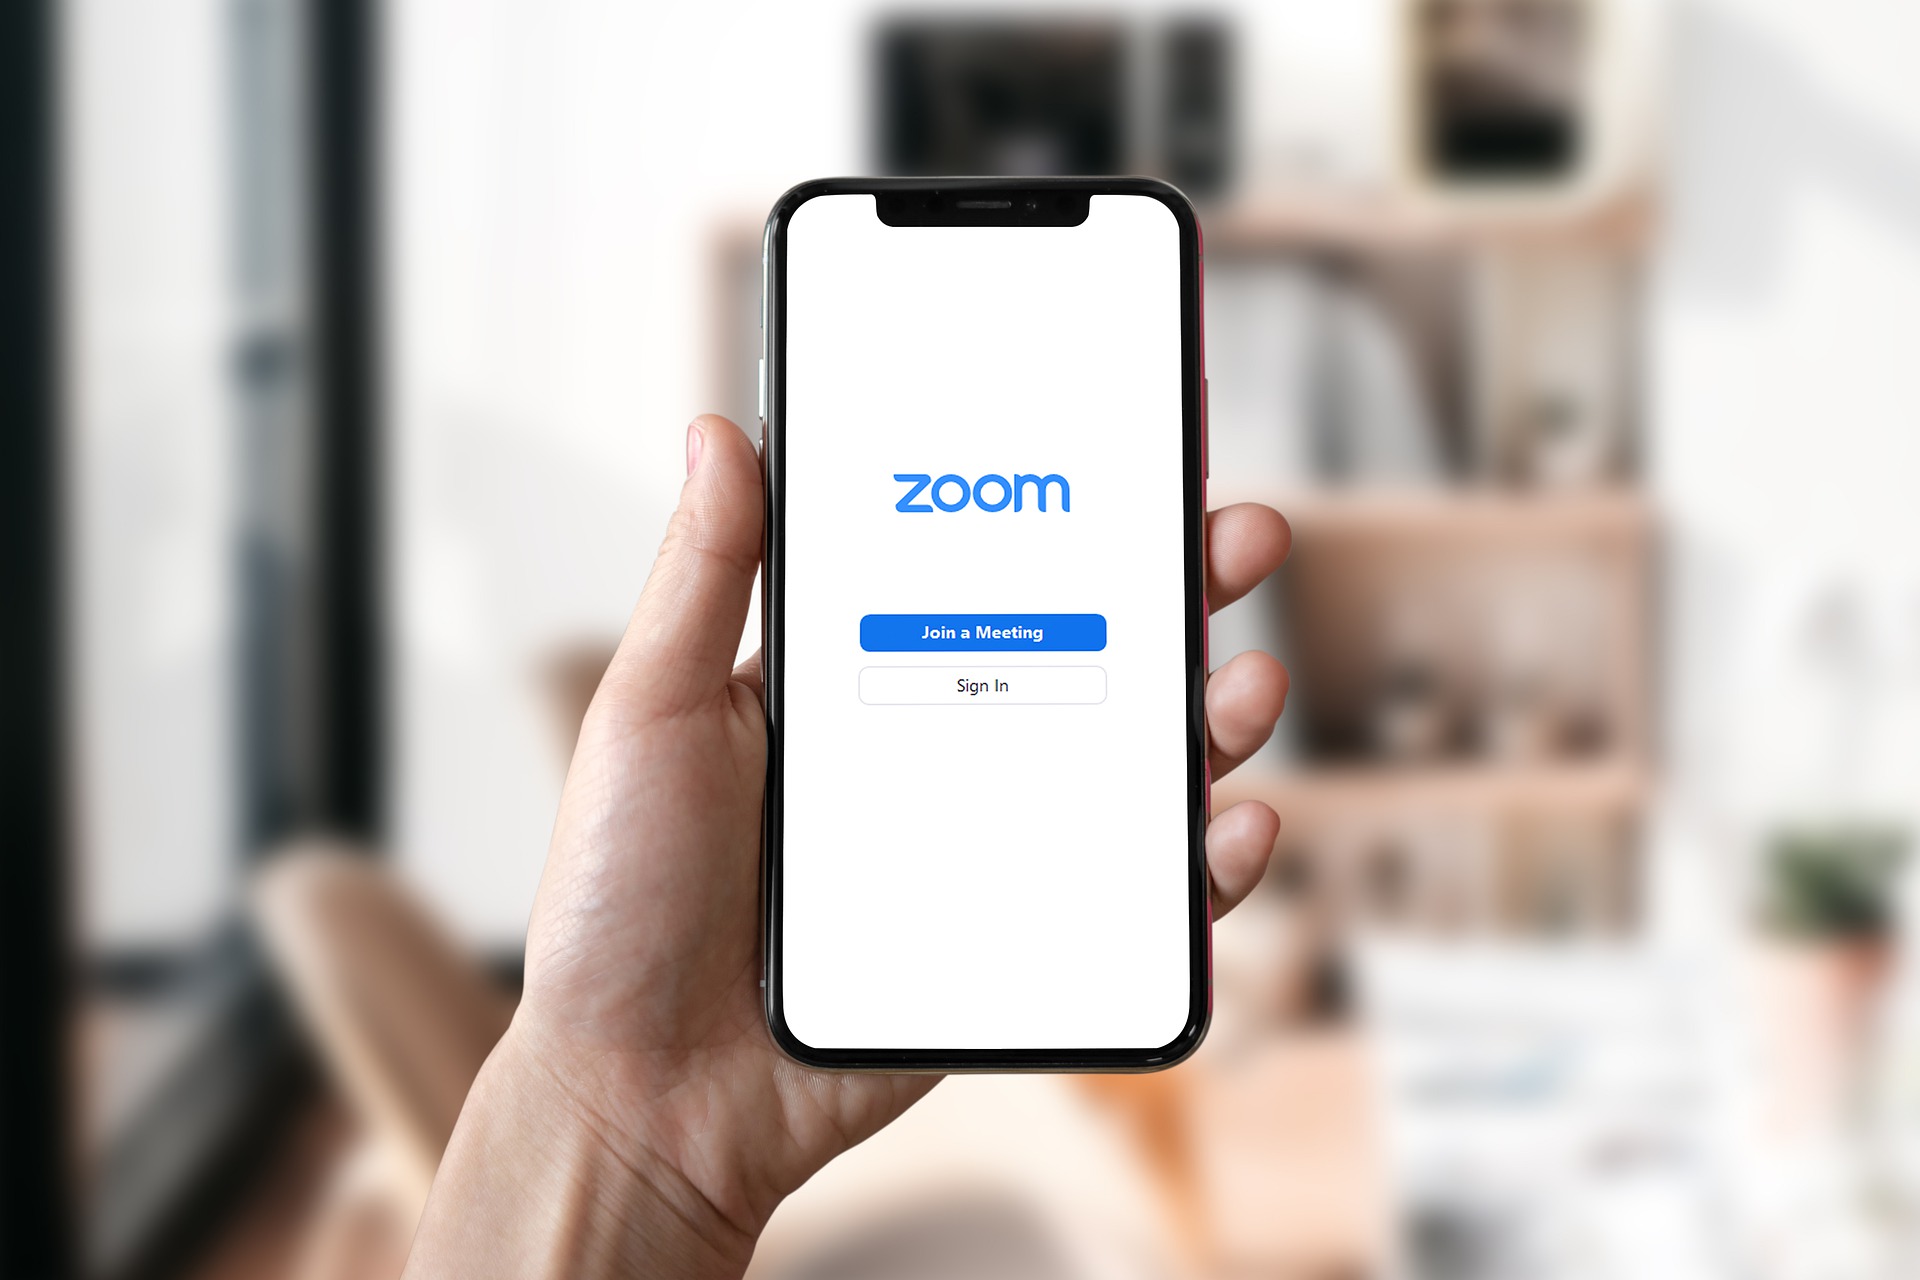 phone opening the Zoom application